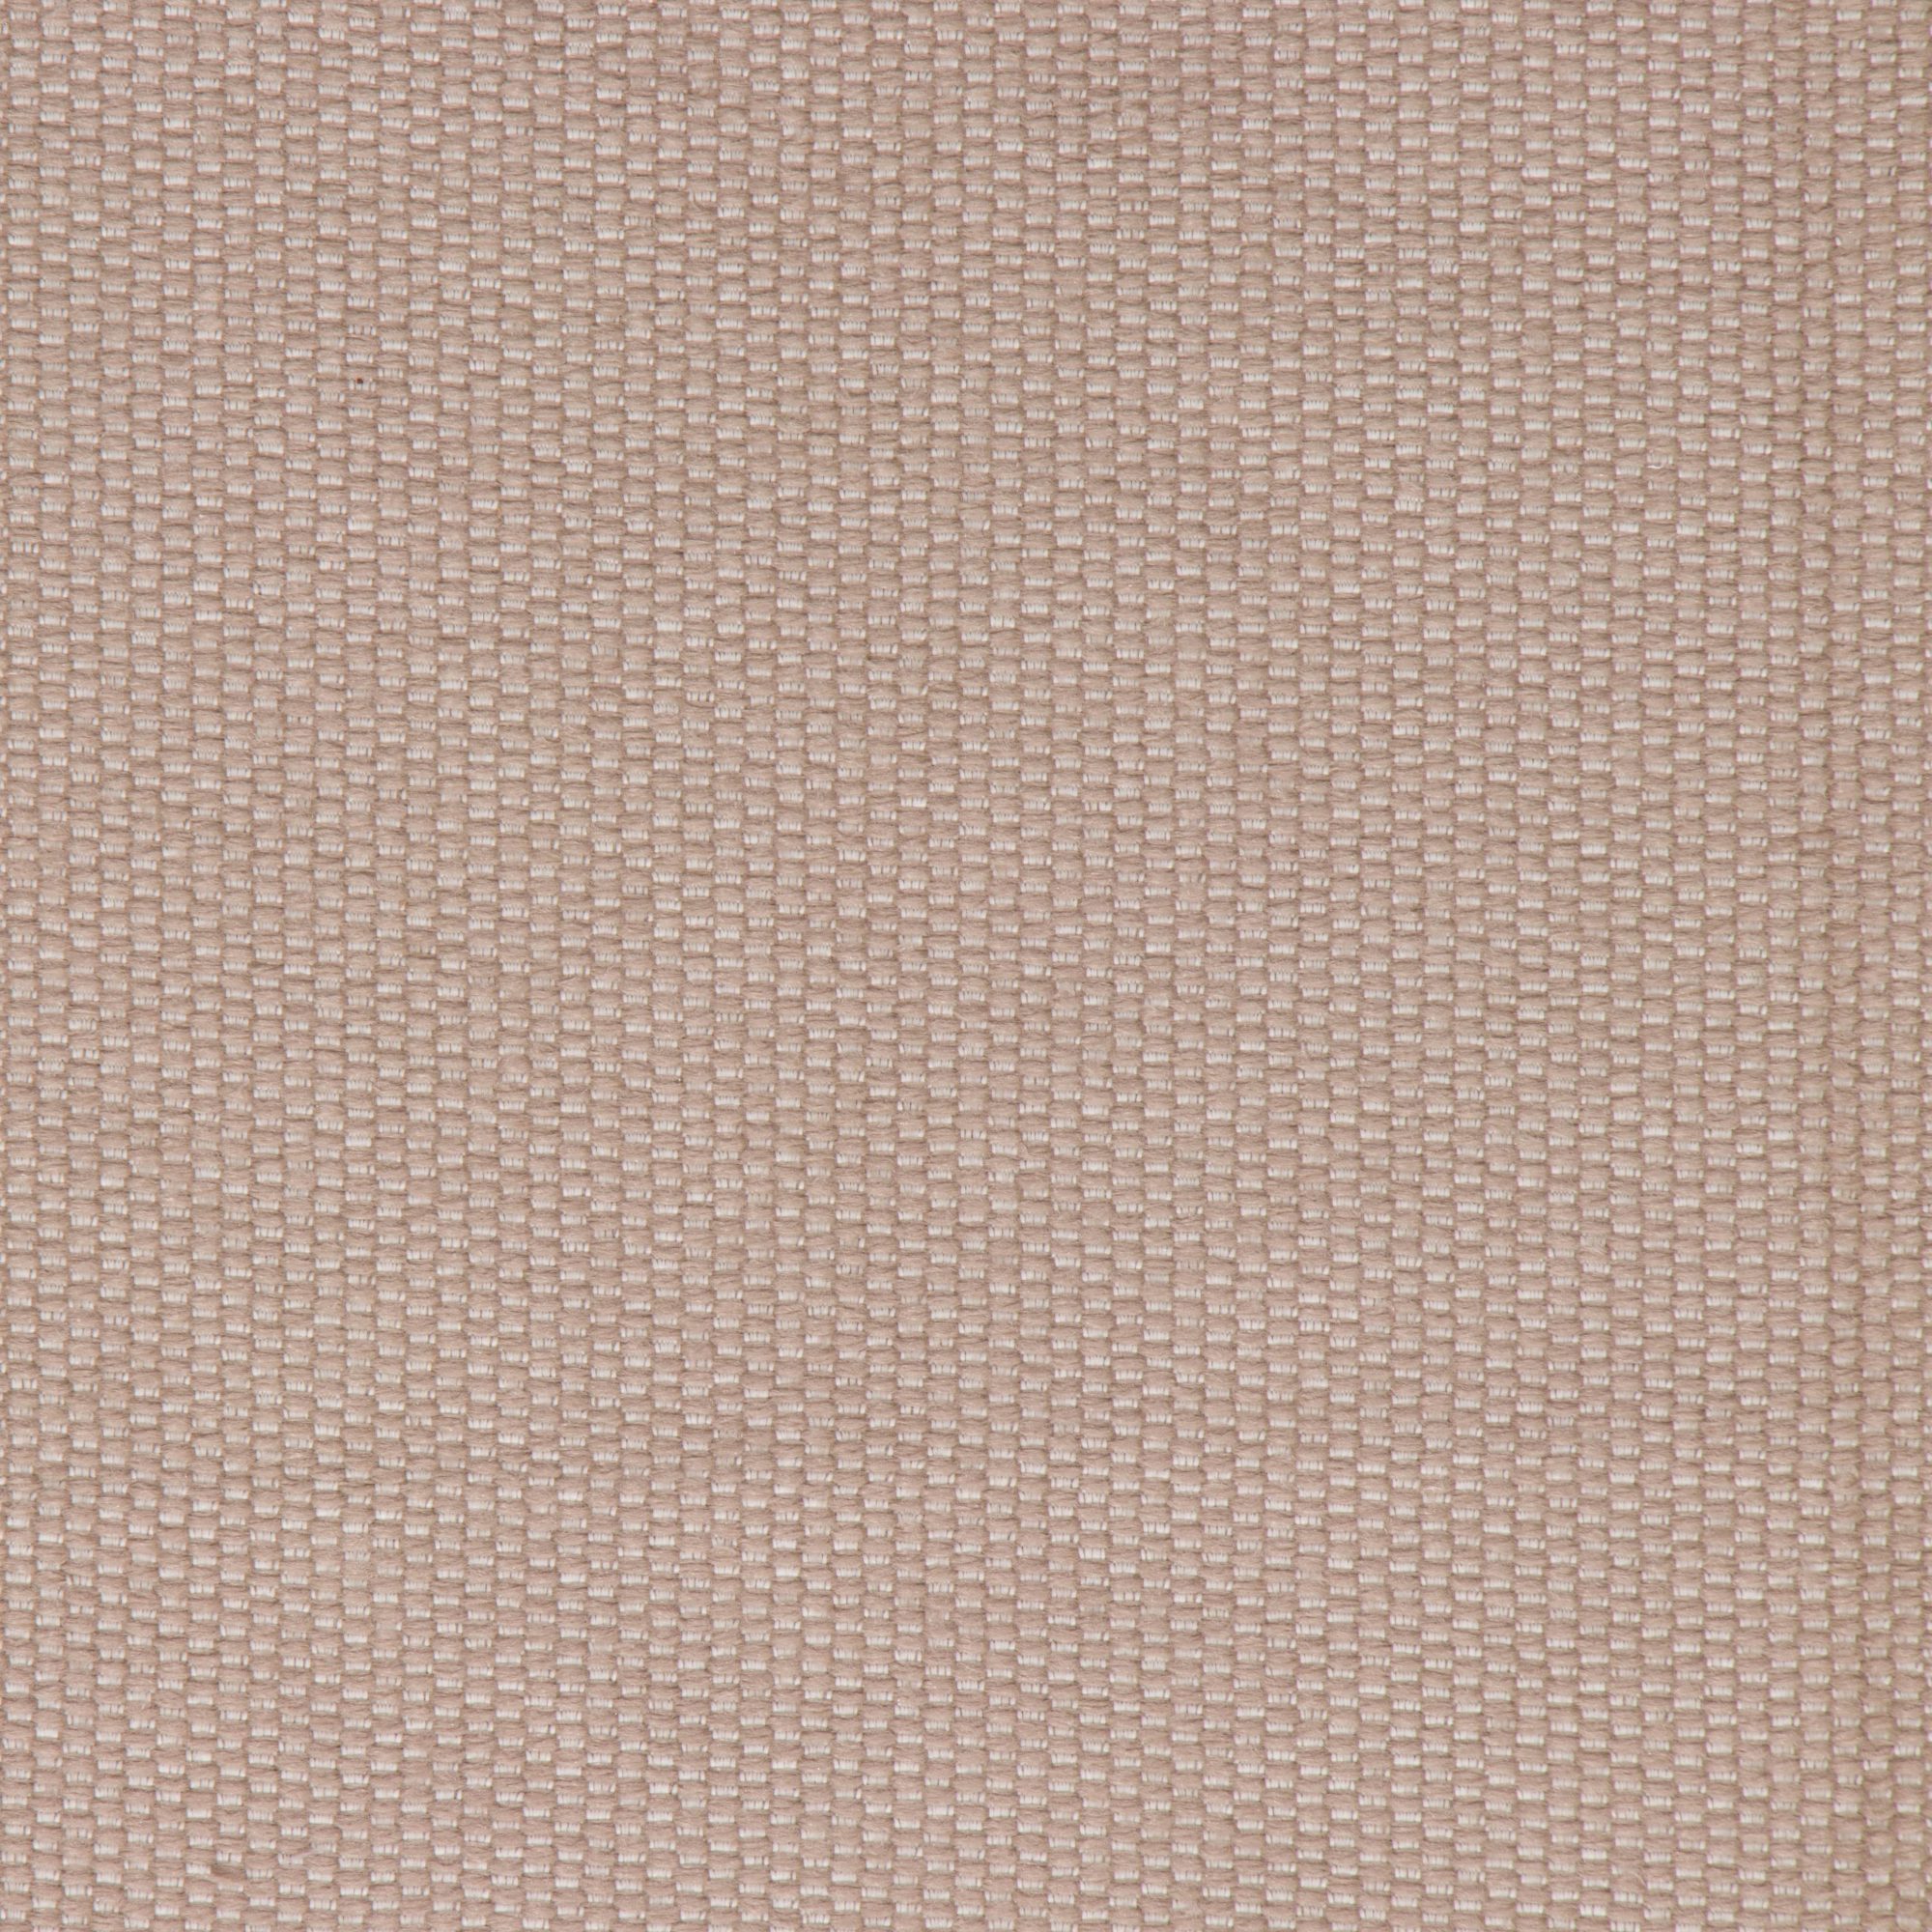 Bella Dura and Bella Dura Home fabric in the pattern Neptune and the color Walnut.